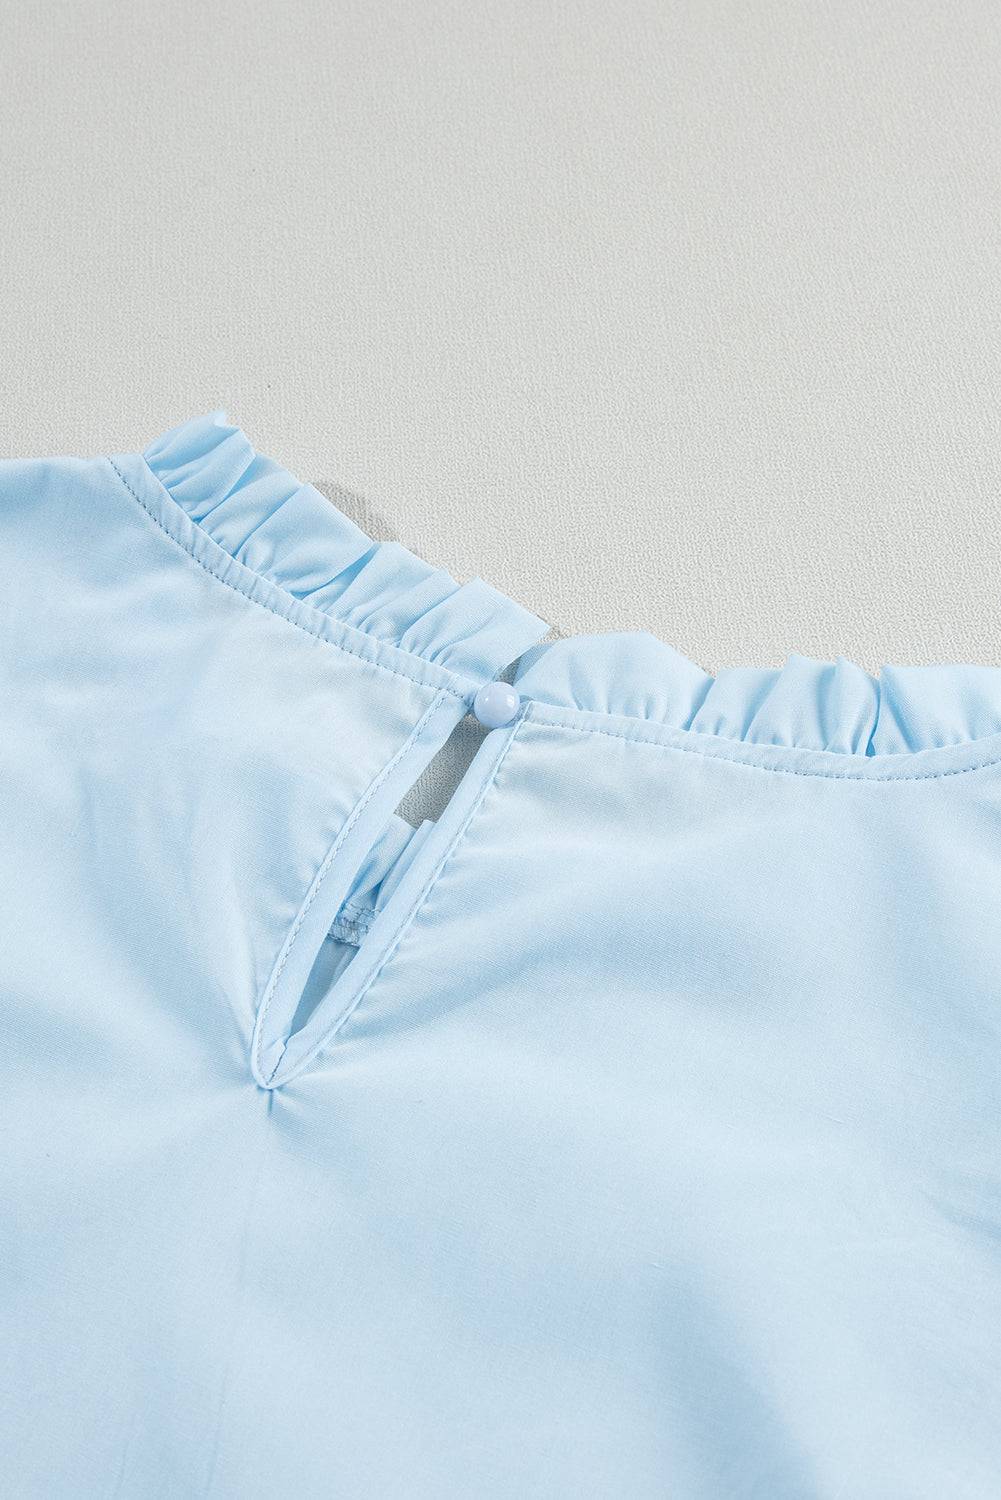 a close up of a light blue shirt on a white surface